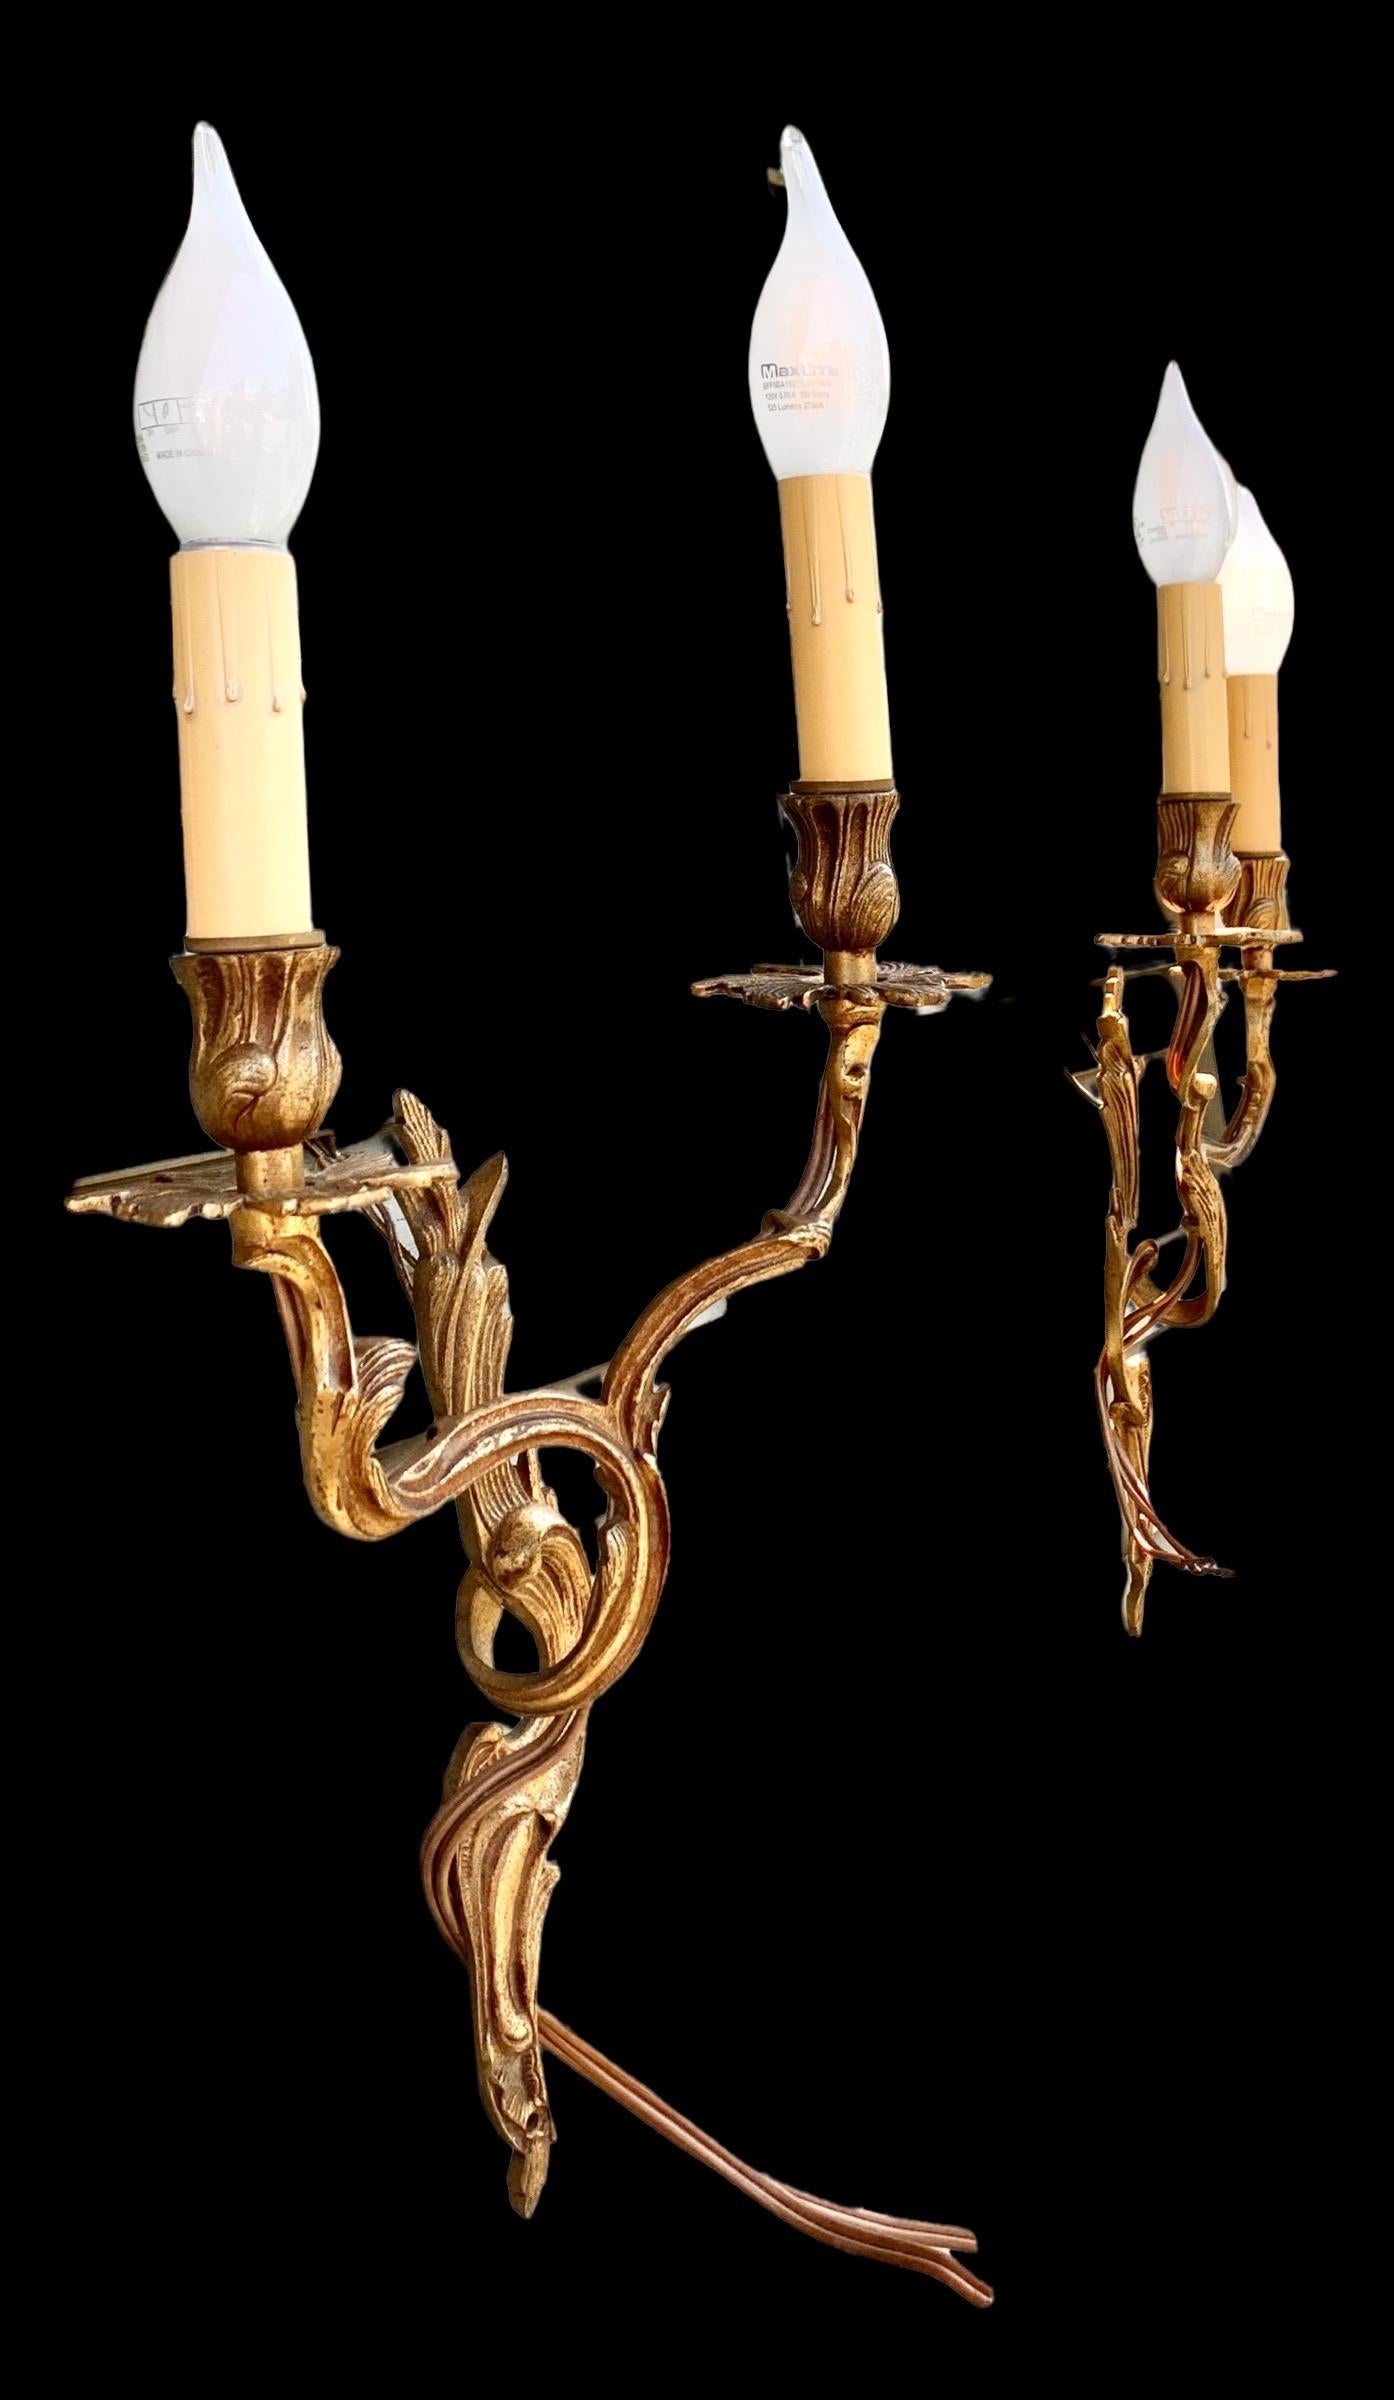 A lovely pair of Louis XV style gilded bronze electrified wall sconces. The flowing floral design is indicative of the high Louis XV style in France although these were created in Spain for the French market. 

Use these in your foyer, dining